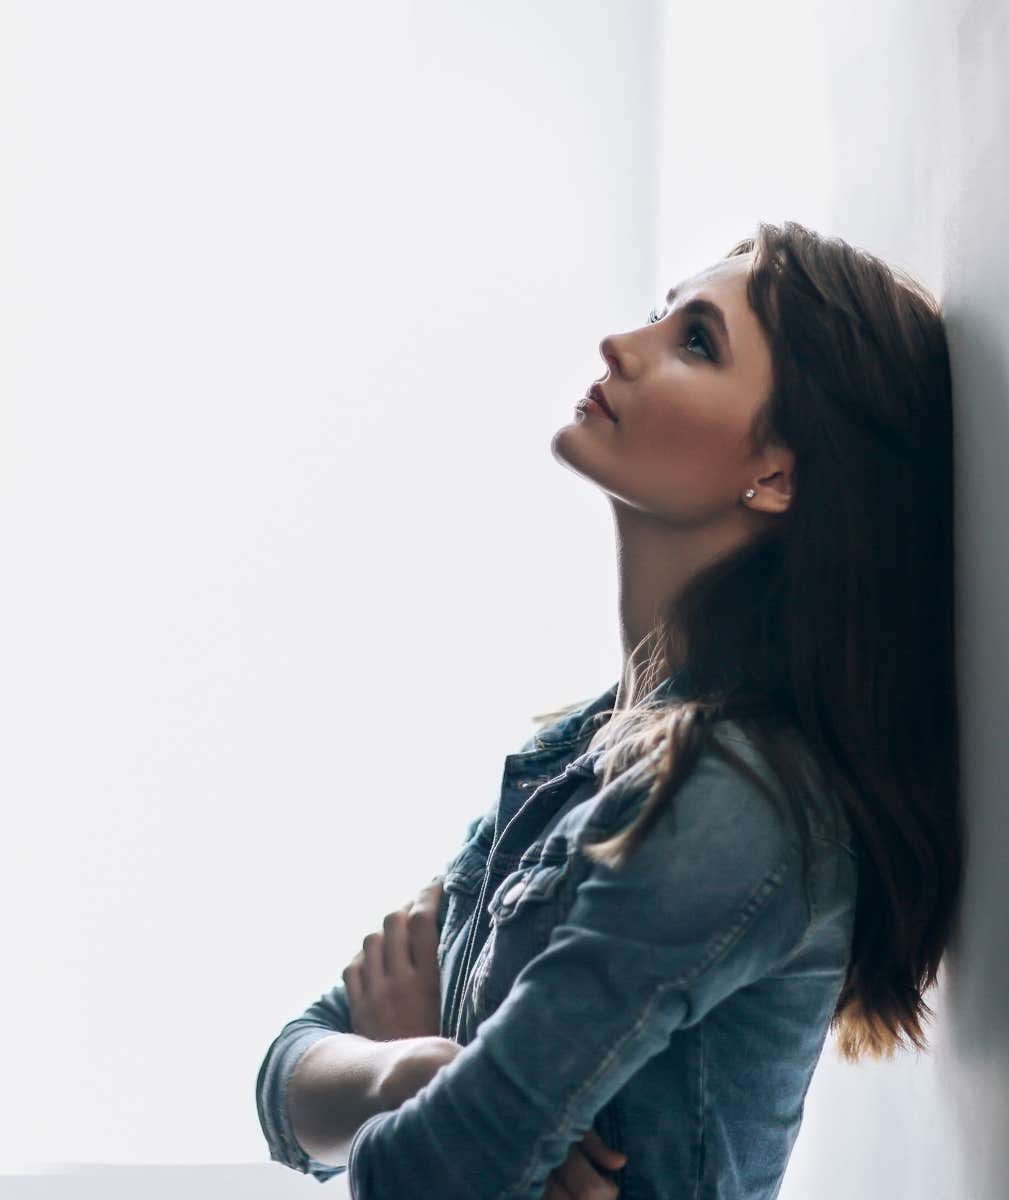 woman thinking deeply leans against a wall